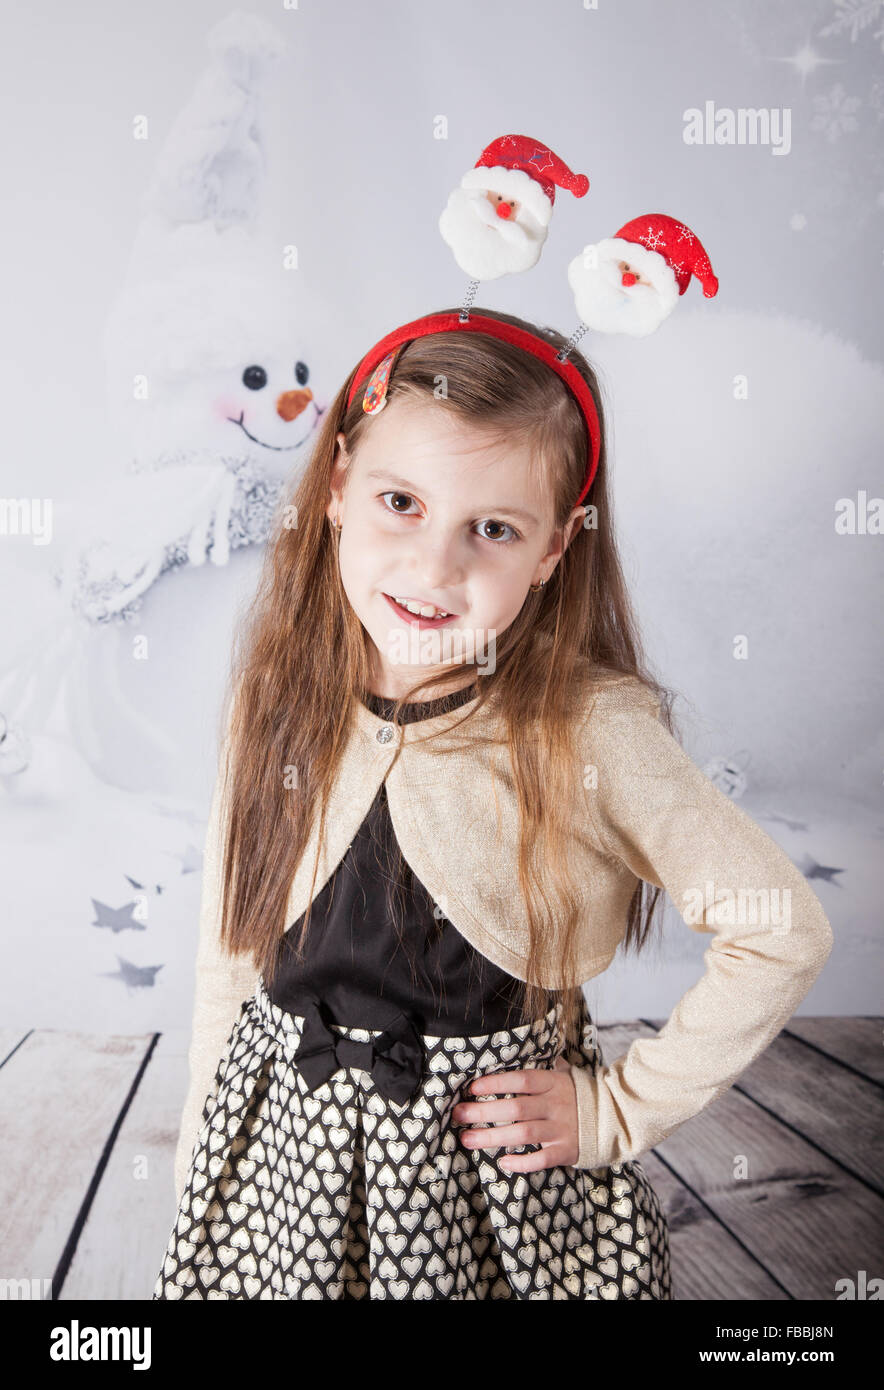 Portrait of a 8 year old girl, nicely dressed, Christmas themed portrait, studio shot. Stock Photo